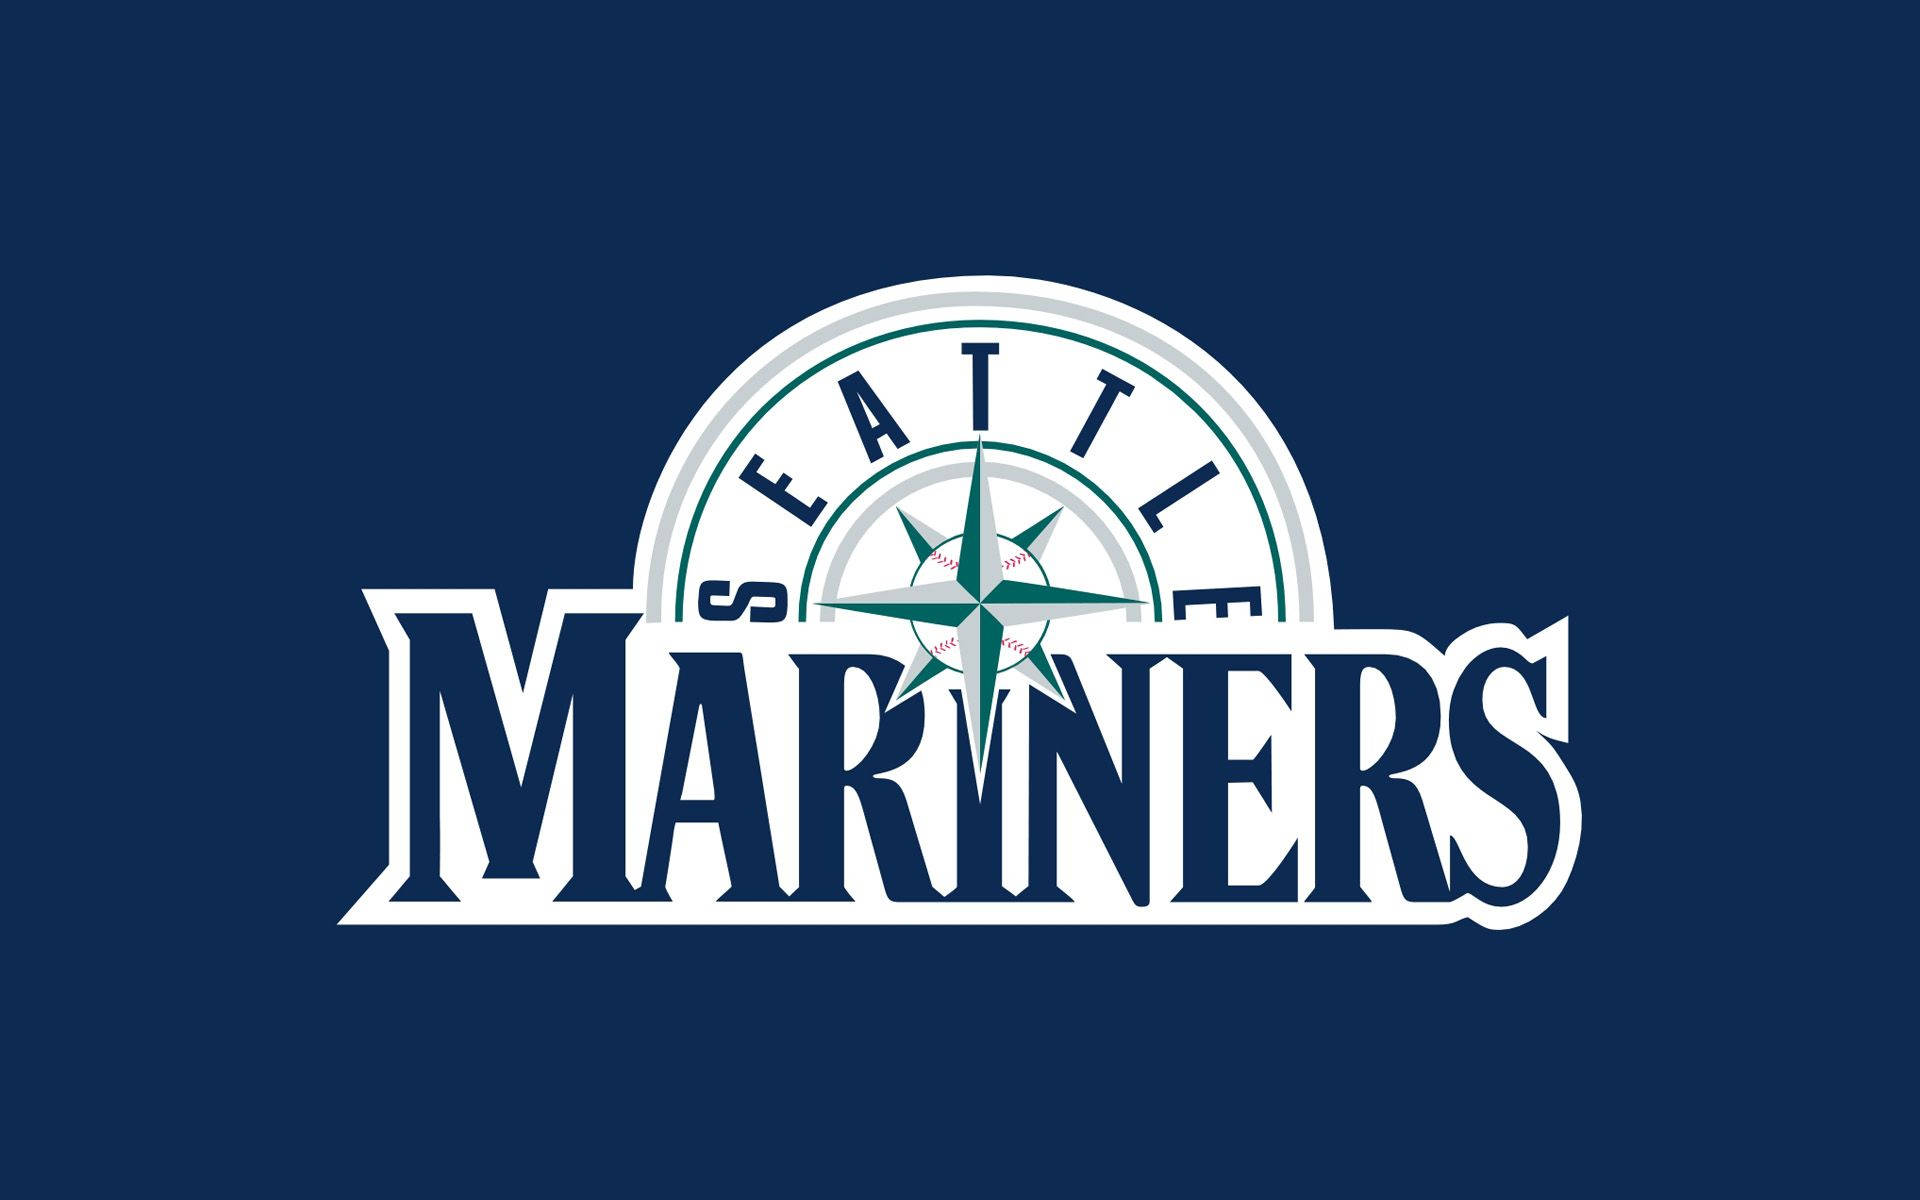 Seattle Mariners In Navy Blue Background